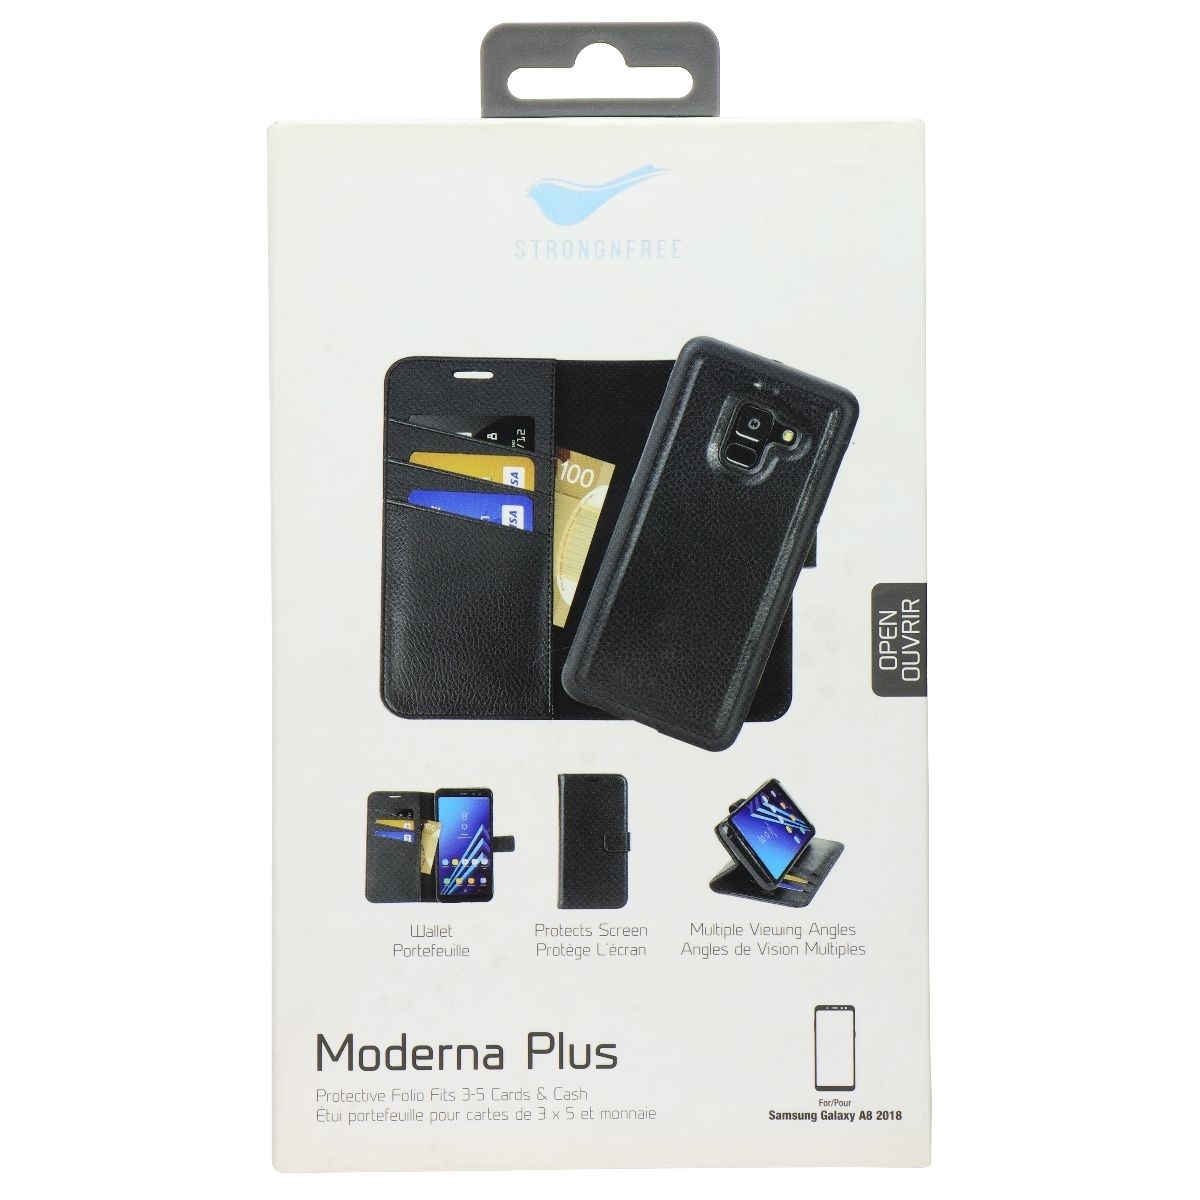 StrongNFree Moderna Plus Series 2-in-1 Wallet Case For Galaxy A8 (2018) - Black (Refurbished)